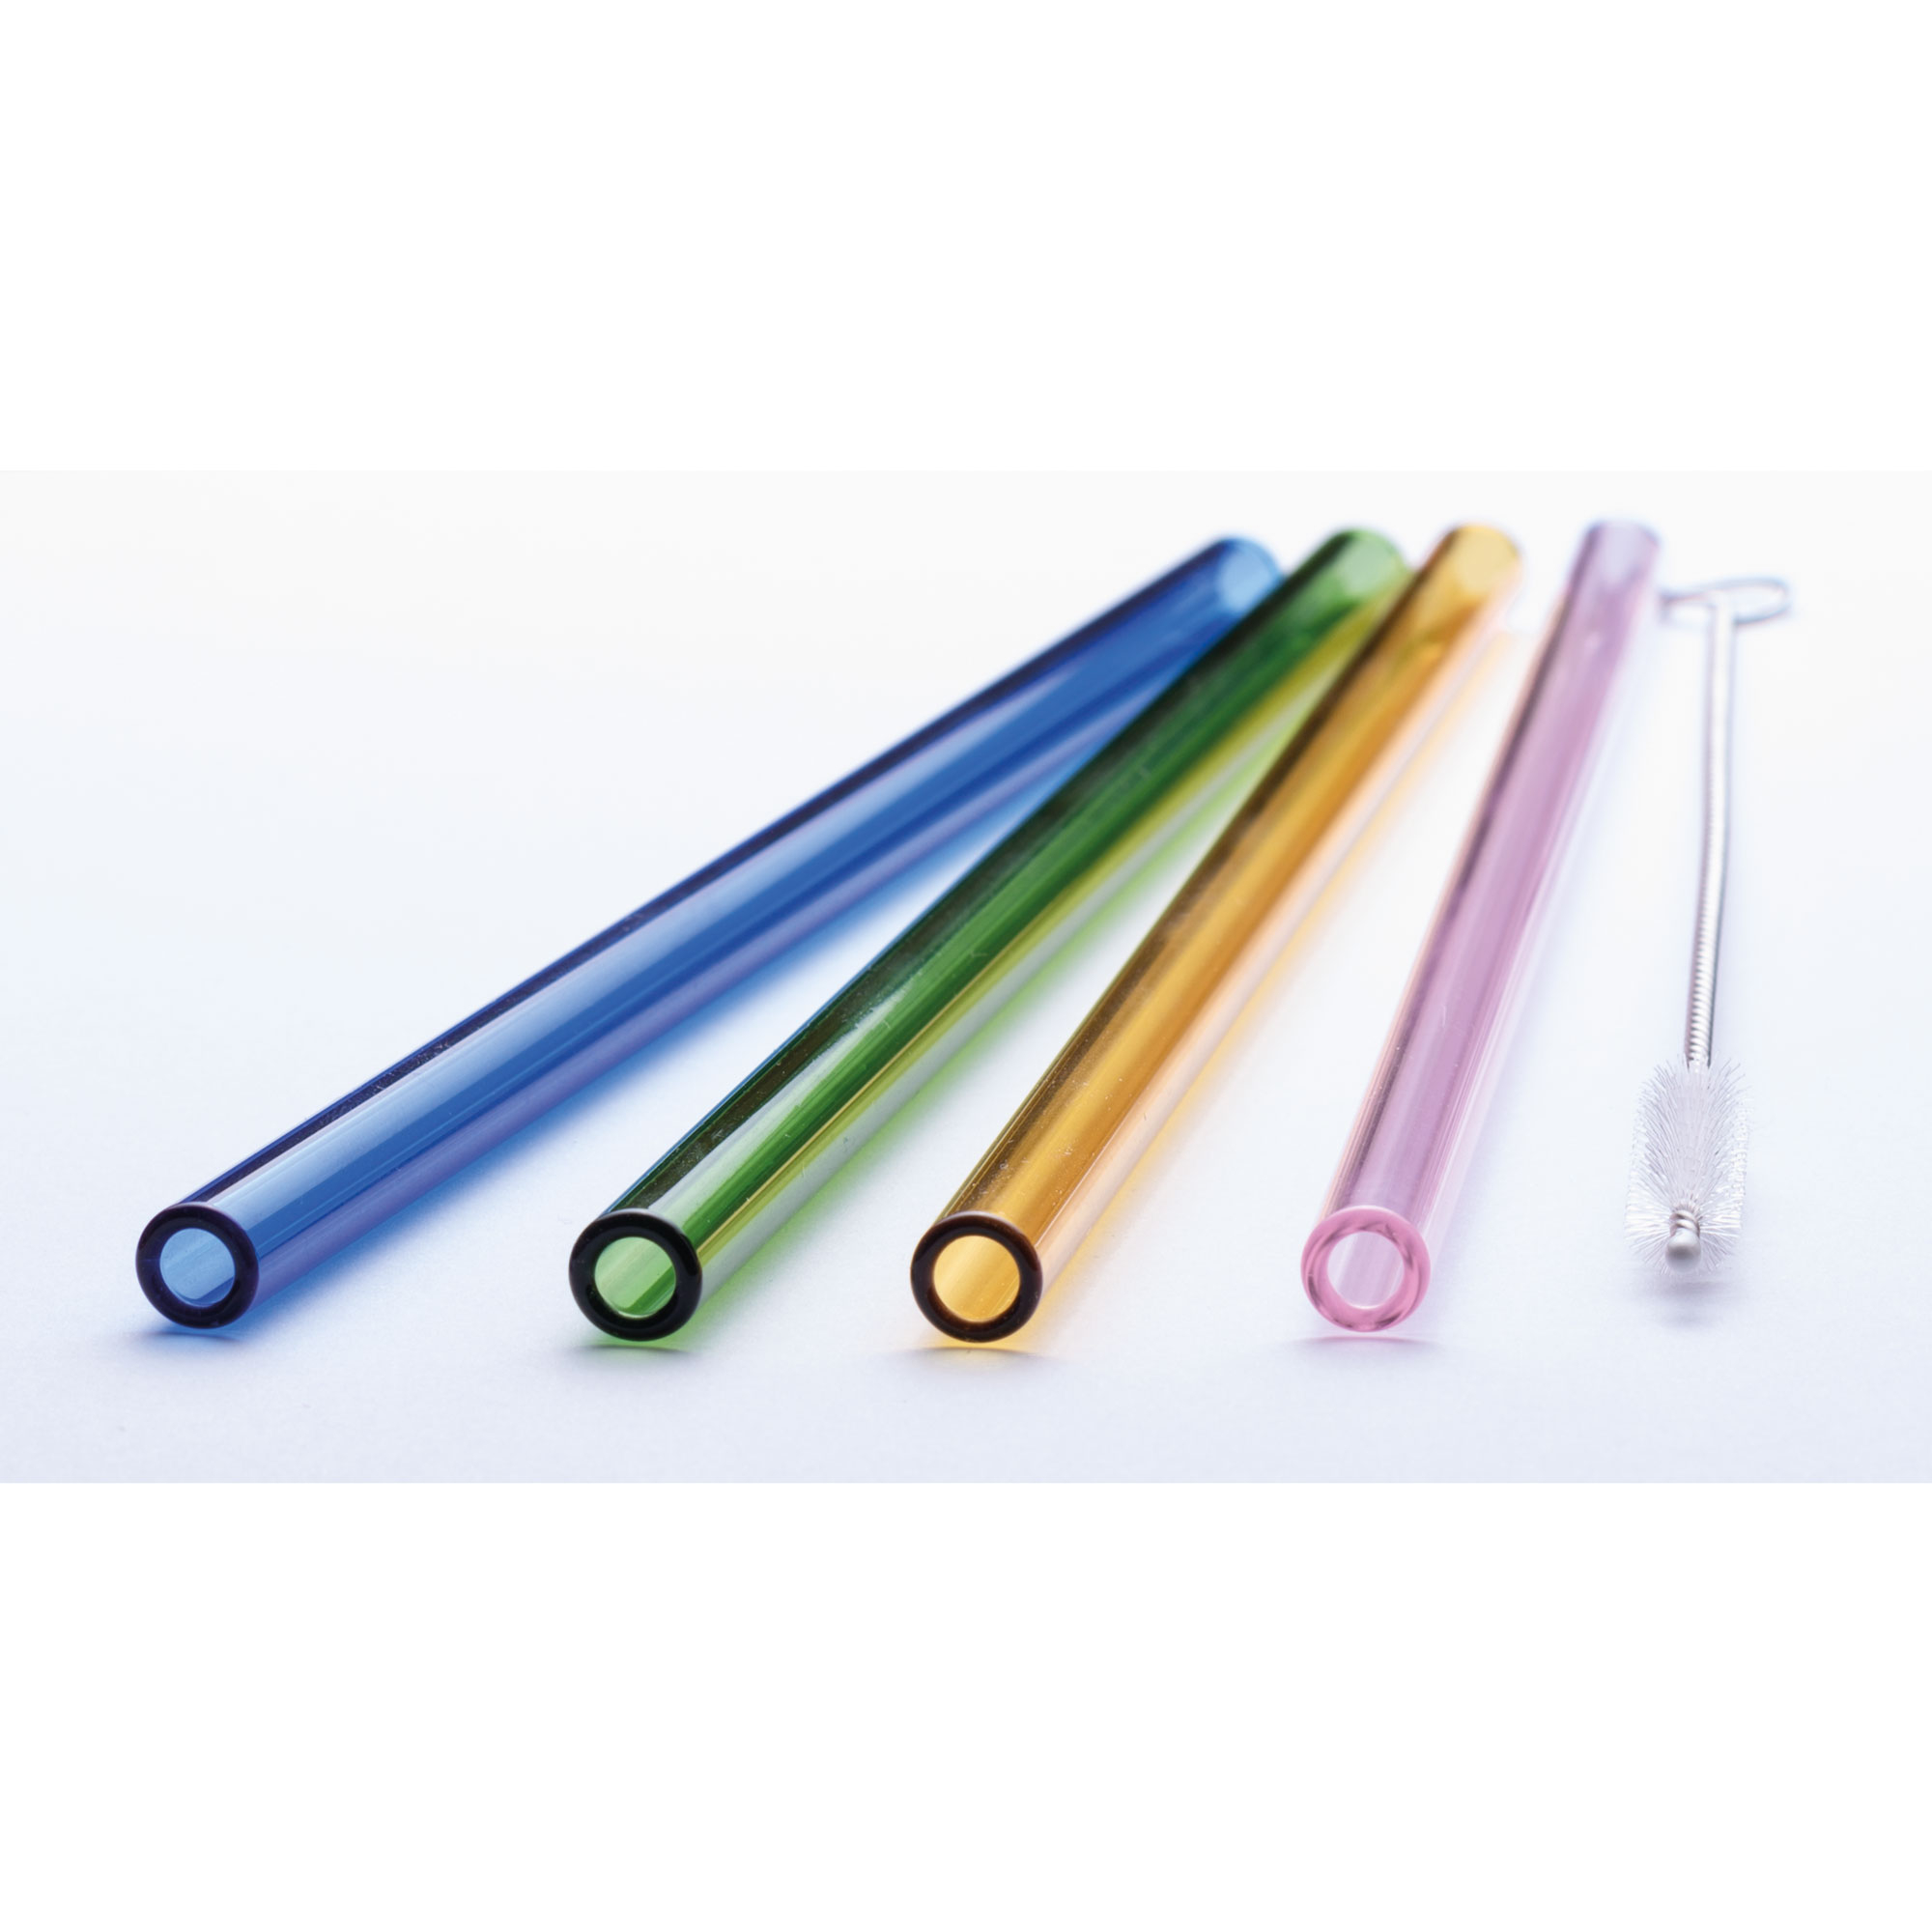 Glass drinking straws (200x8mm) - various colors (50 pcs. + 3 brushes)